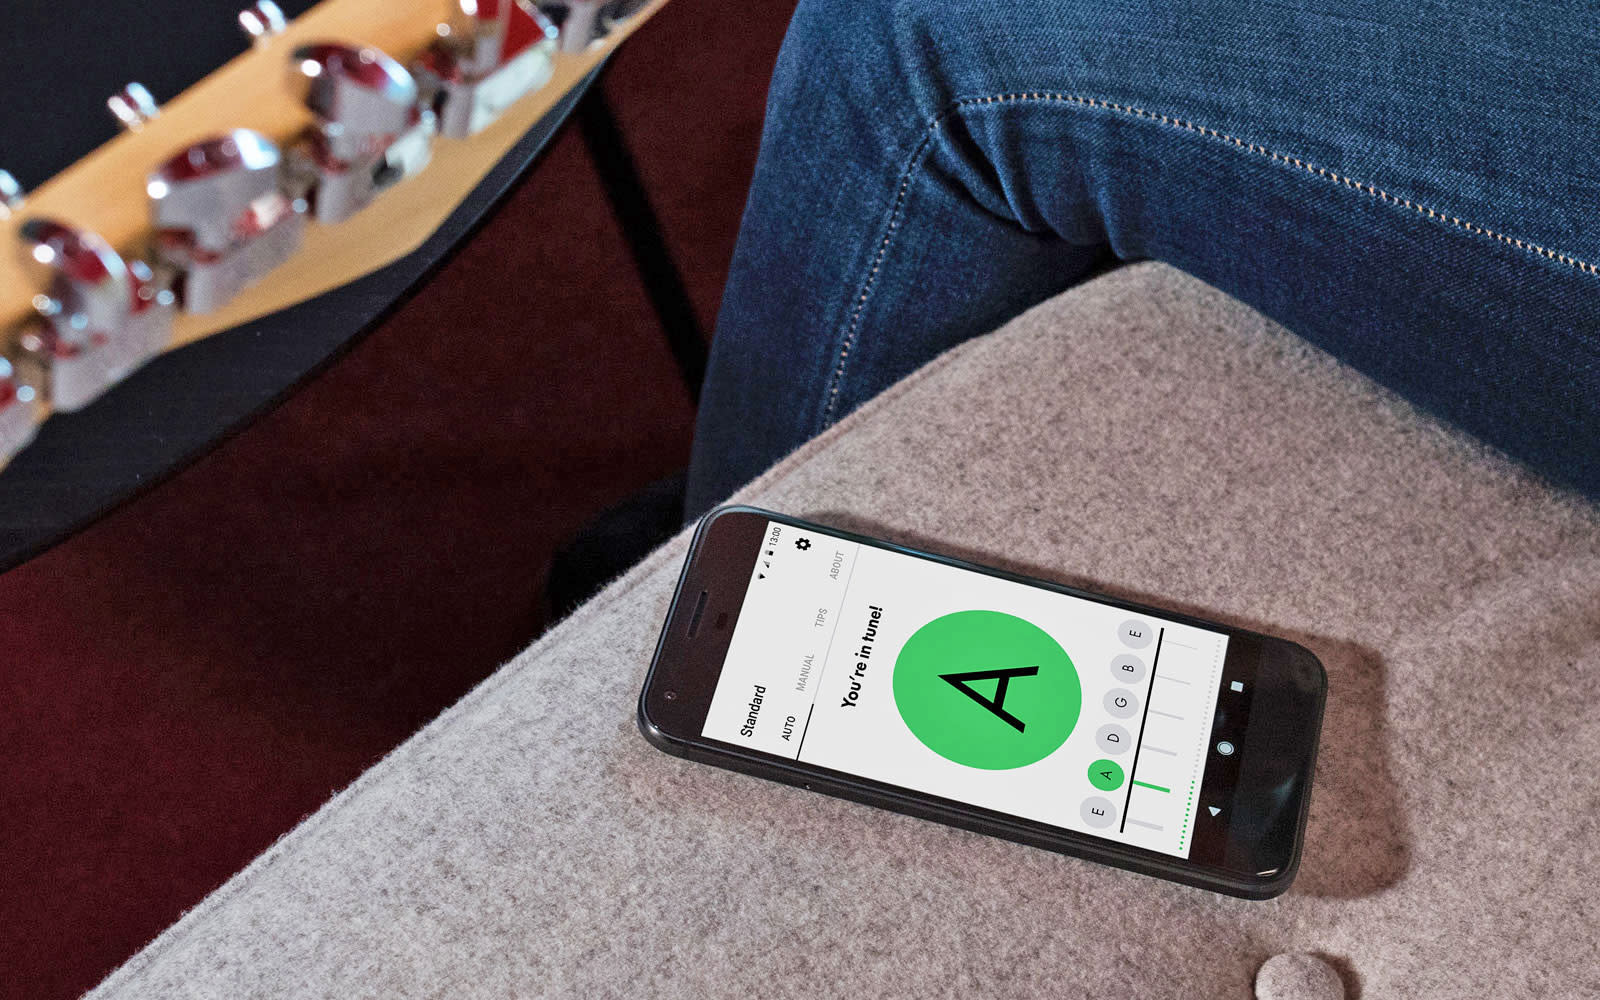 Fender brings its guitar tuner app to Android devices | Engadget